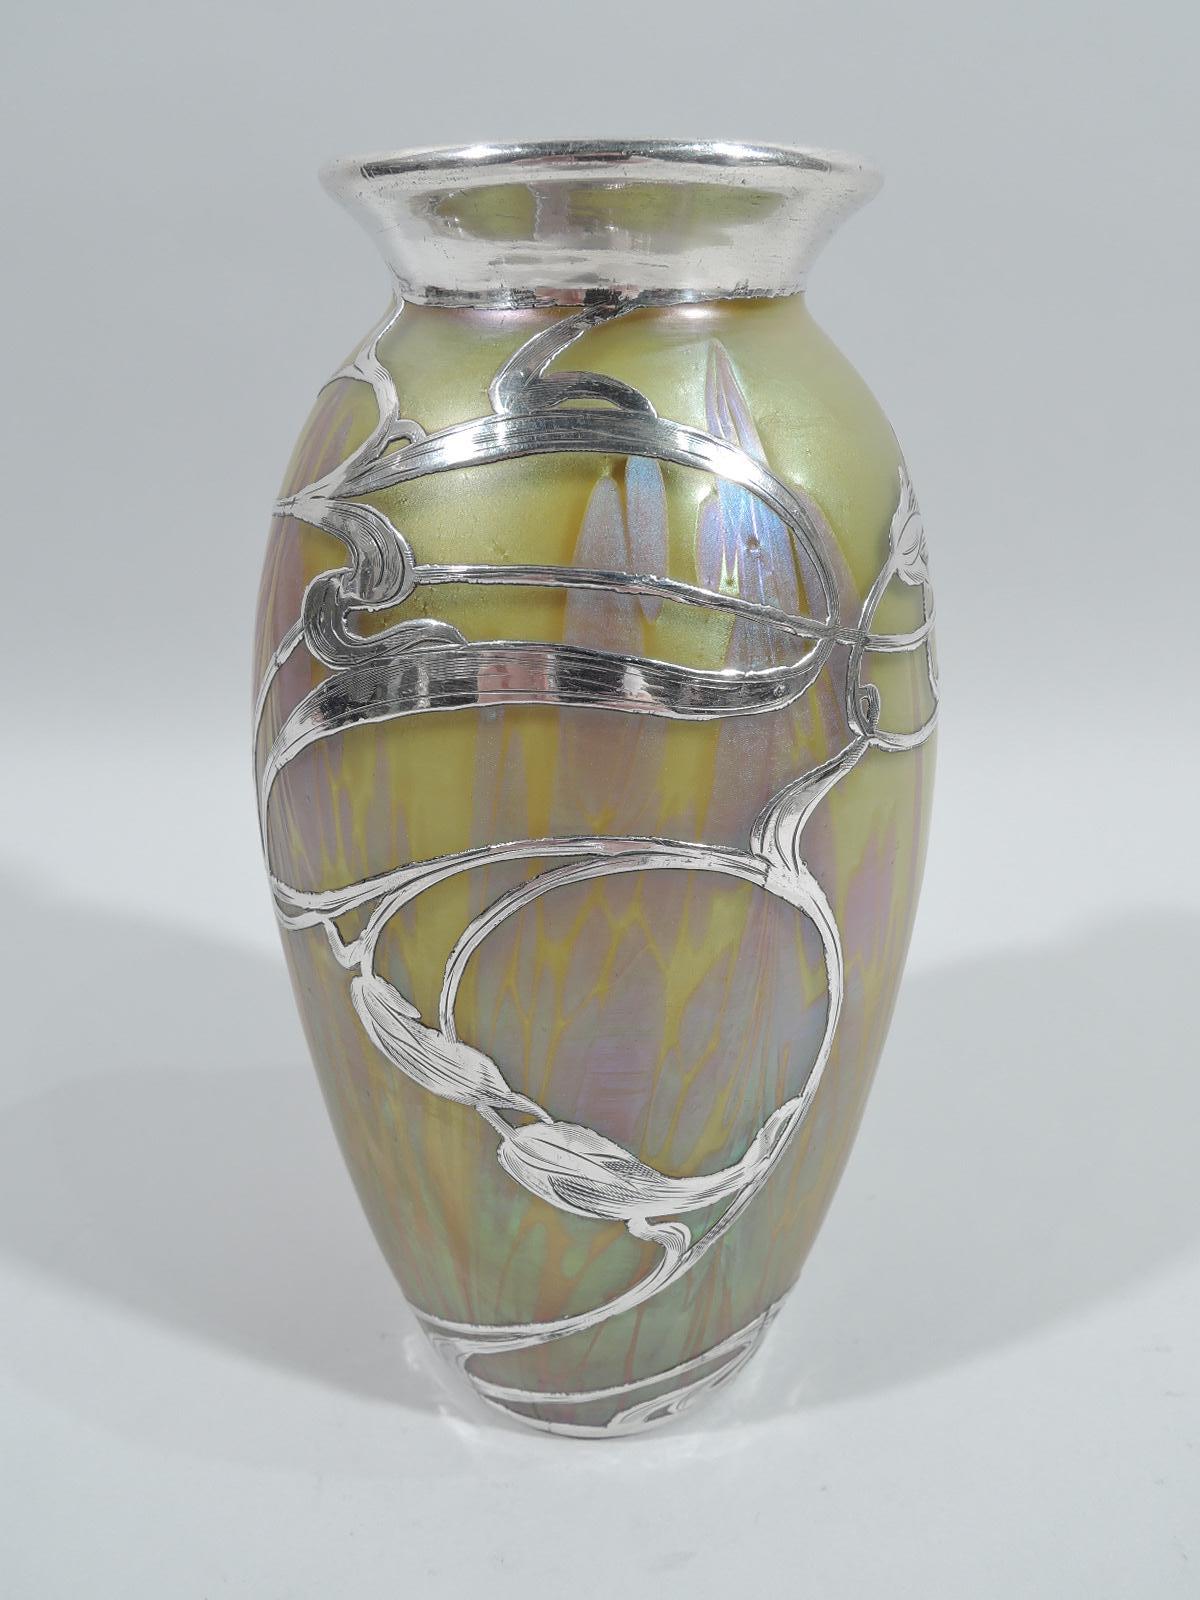 Turn-of-the-century Art Nouveau glass vase by historic Loetz with engraved silver overlay. Ovoid with flared rim. Overlay in form of loose, meandering, and whiplash tendrils with elongated flower heads. Iridescent glass in Medici pattern with